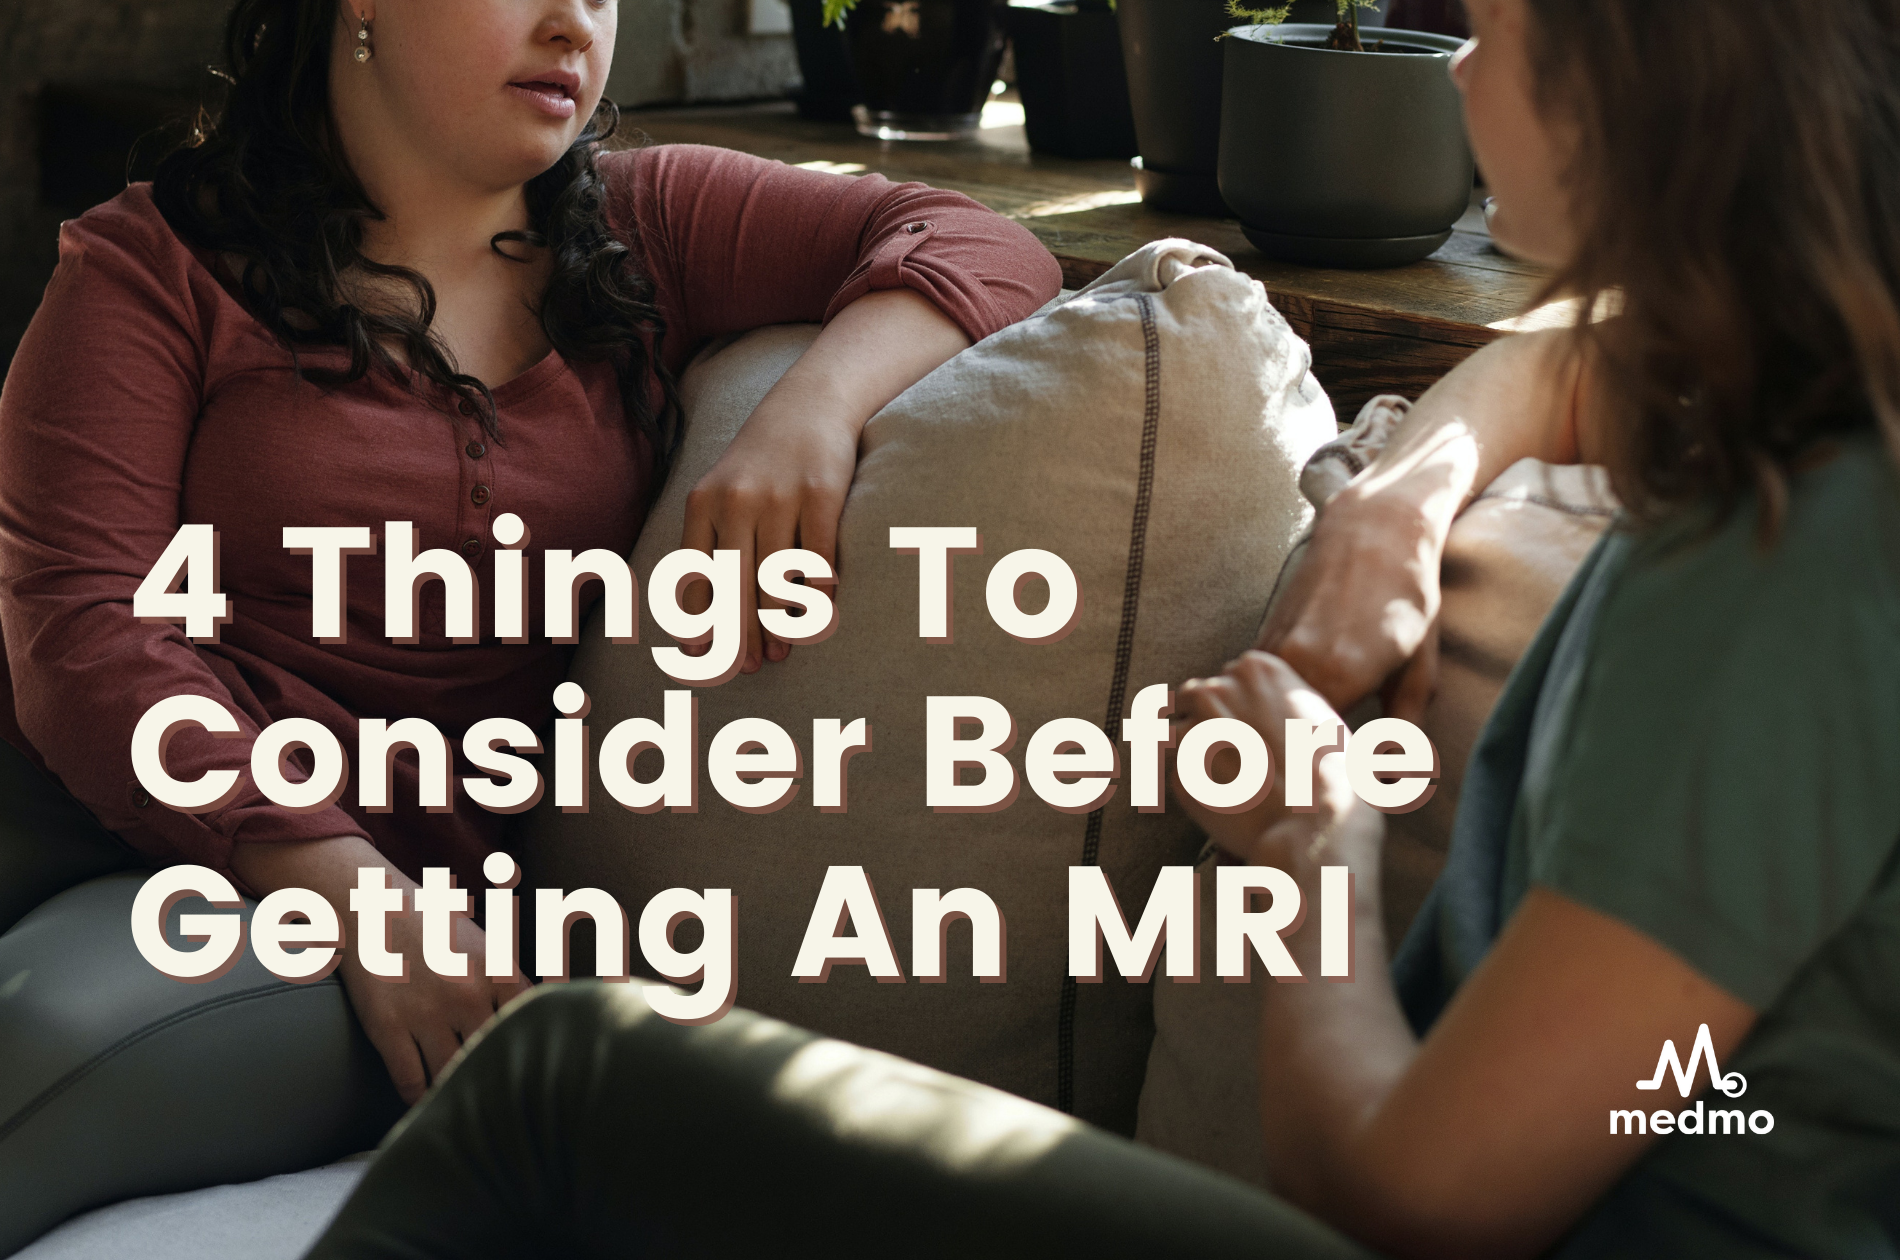 4 Things To Consider Before Getting An MRI